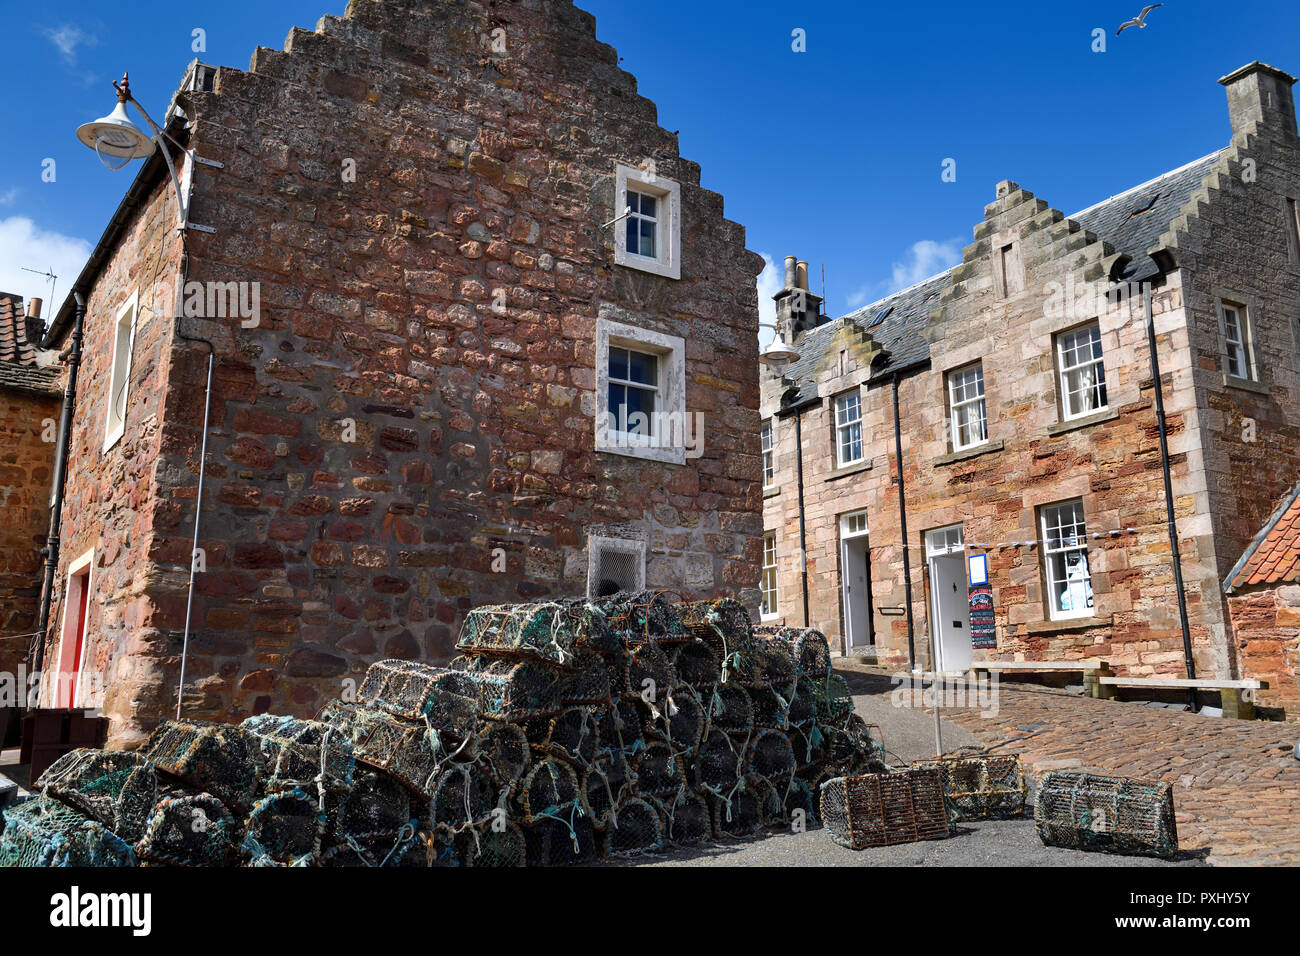 Brodie's Grannie's restaurant and stone houses and lobster traps in the fishing village of Crail Fife Scotland UK Stock Photo